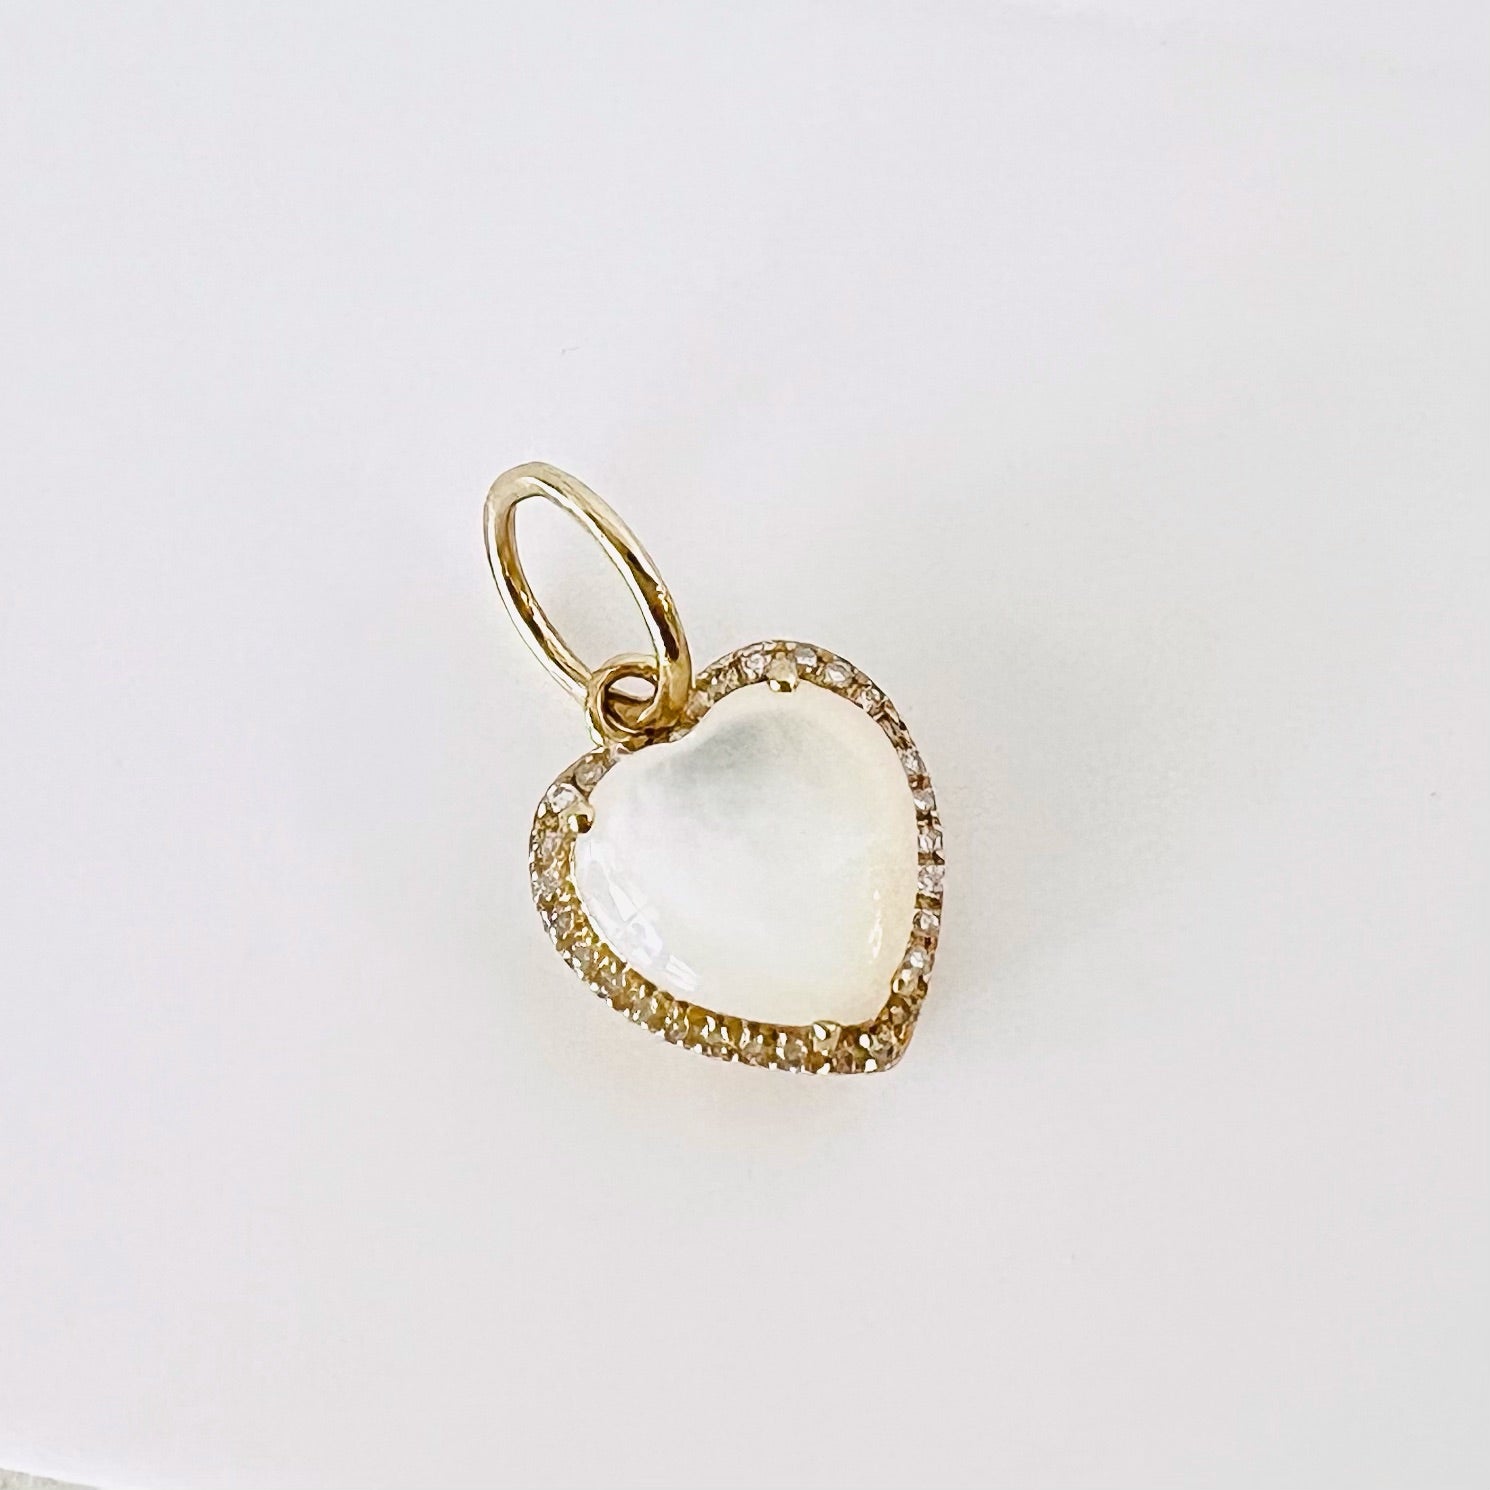 14k gold, diamond and mother of pearl heart pendant/charm